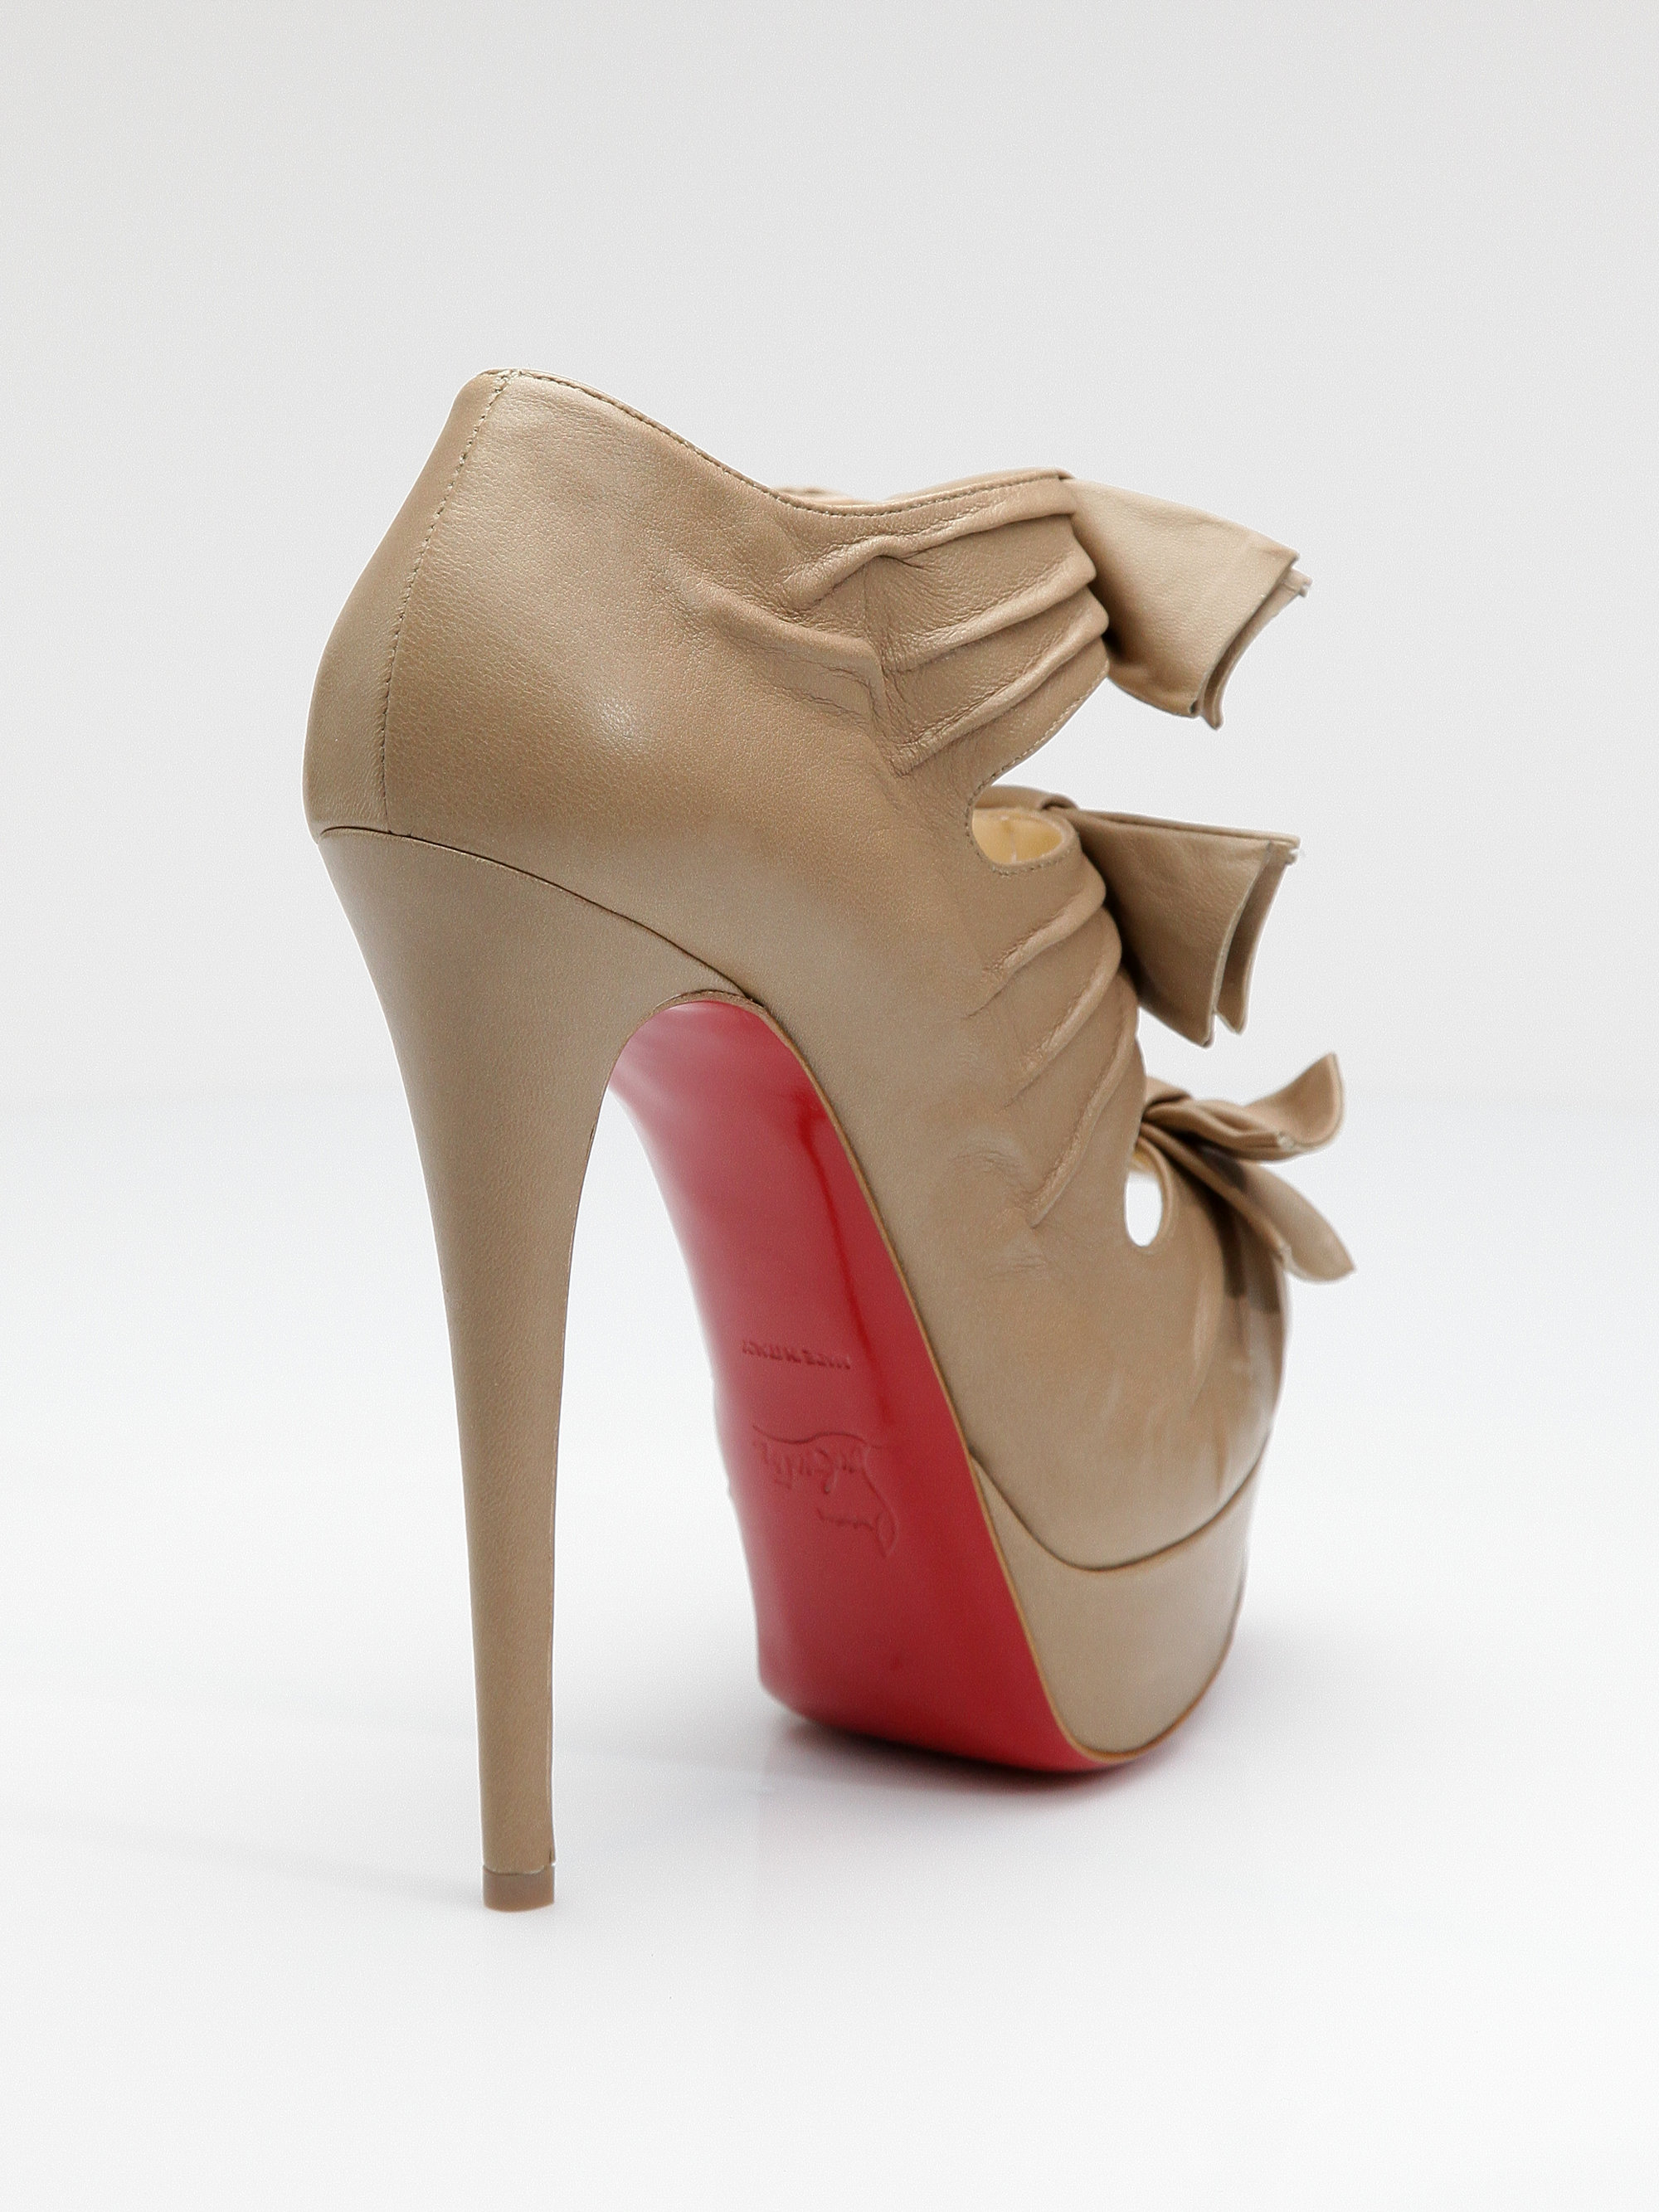 Christian louboutin Madame Butterfly Platform Pumps in Beige ...  